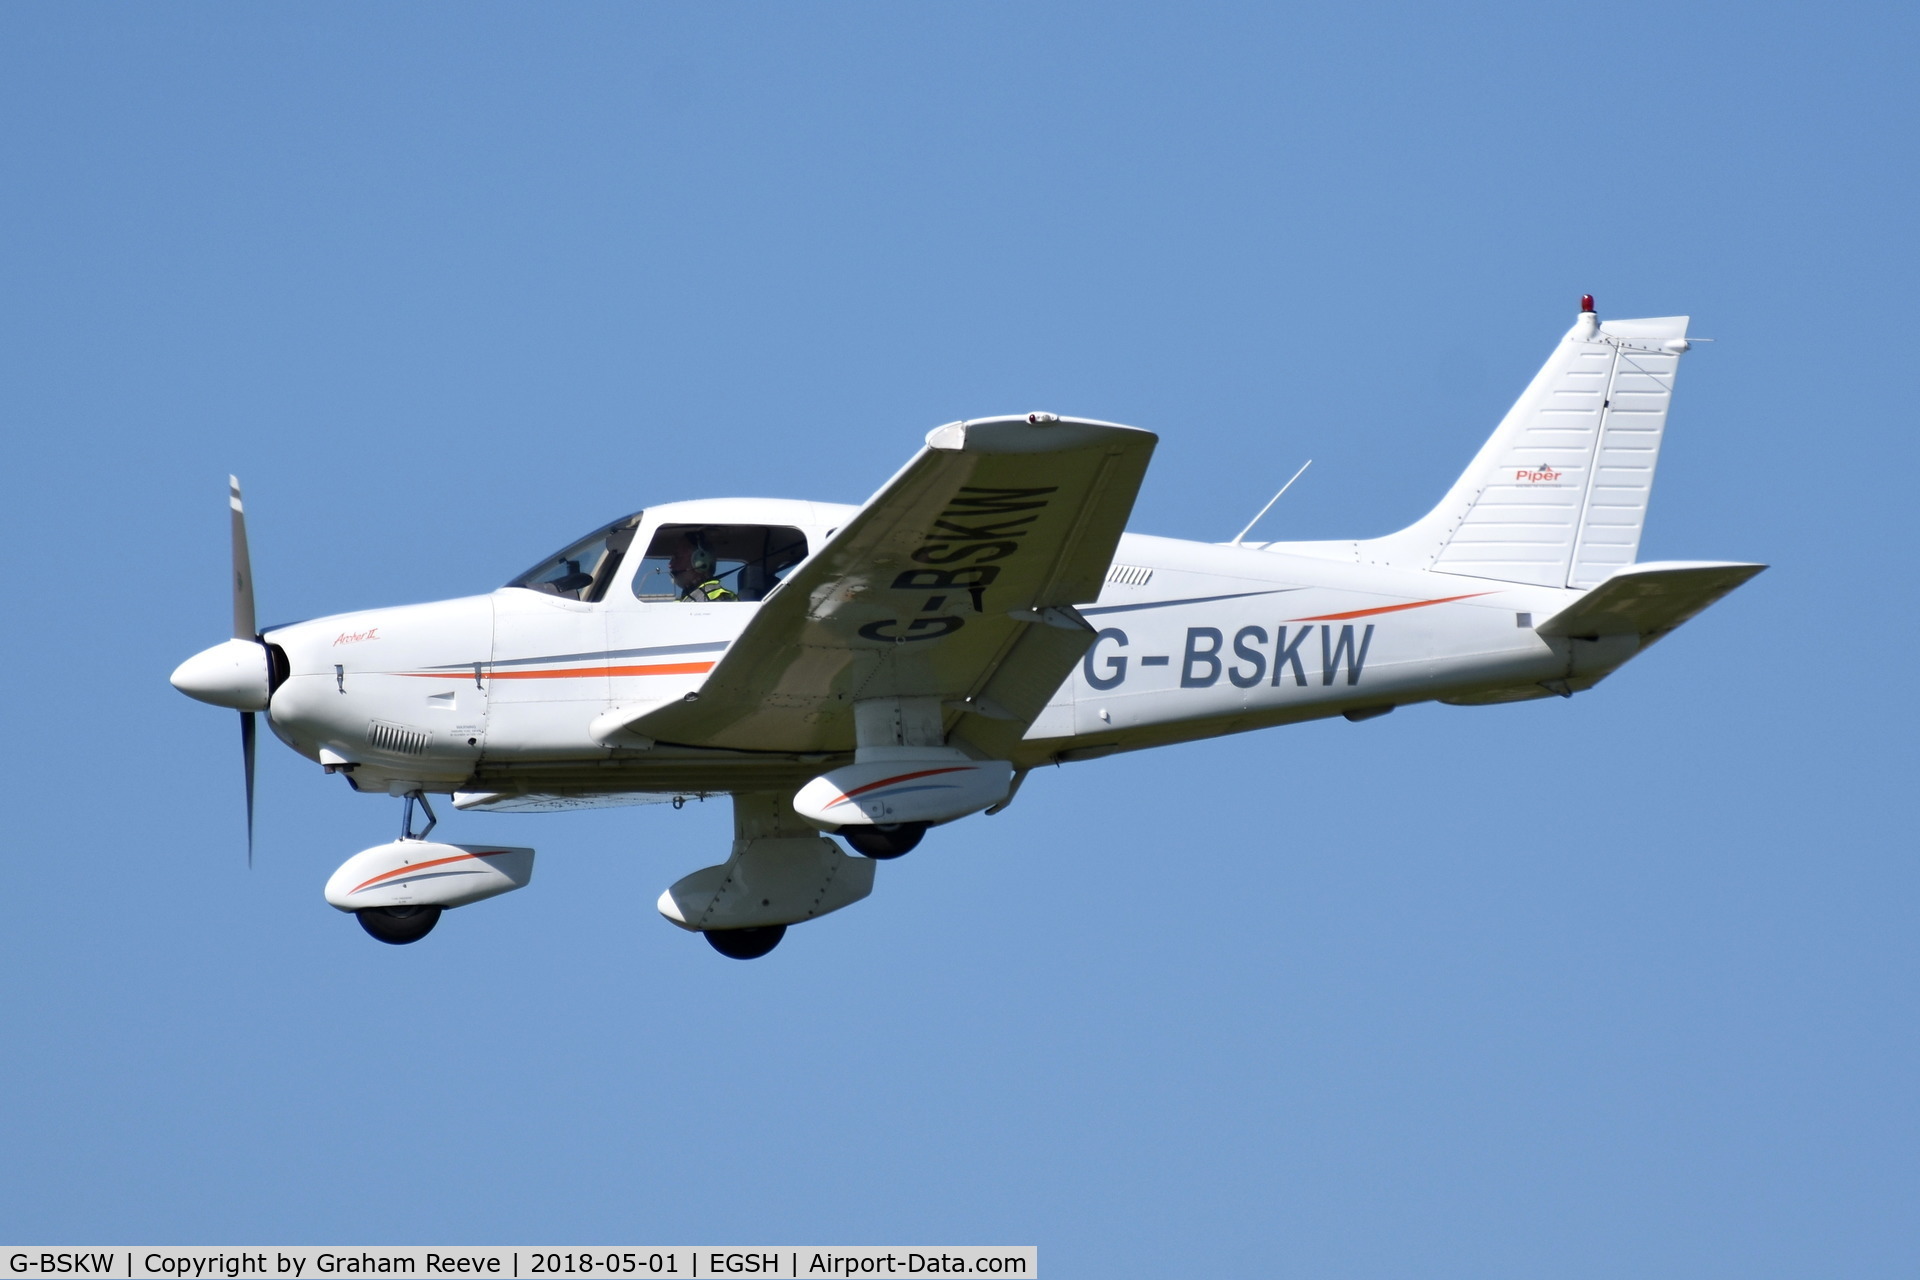 G-BSKW, 1989 Piper PA-28-181 Cherokee Archer II C/N 2890138, Landing at Norwich.